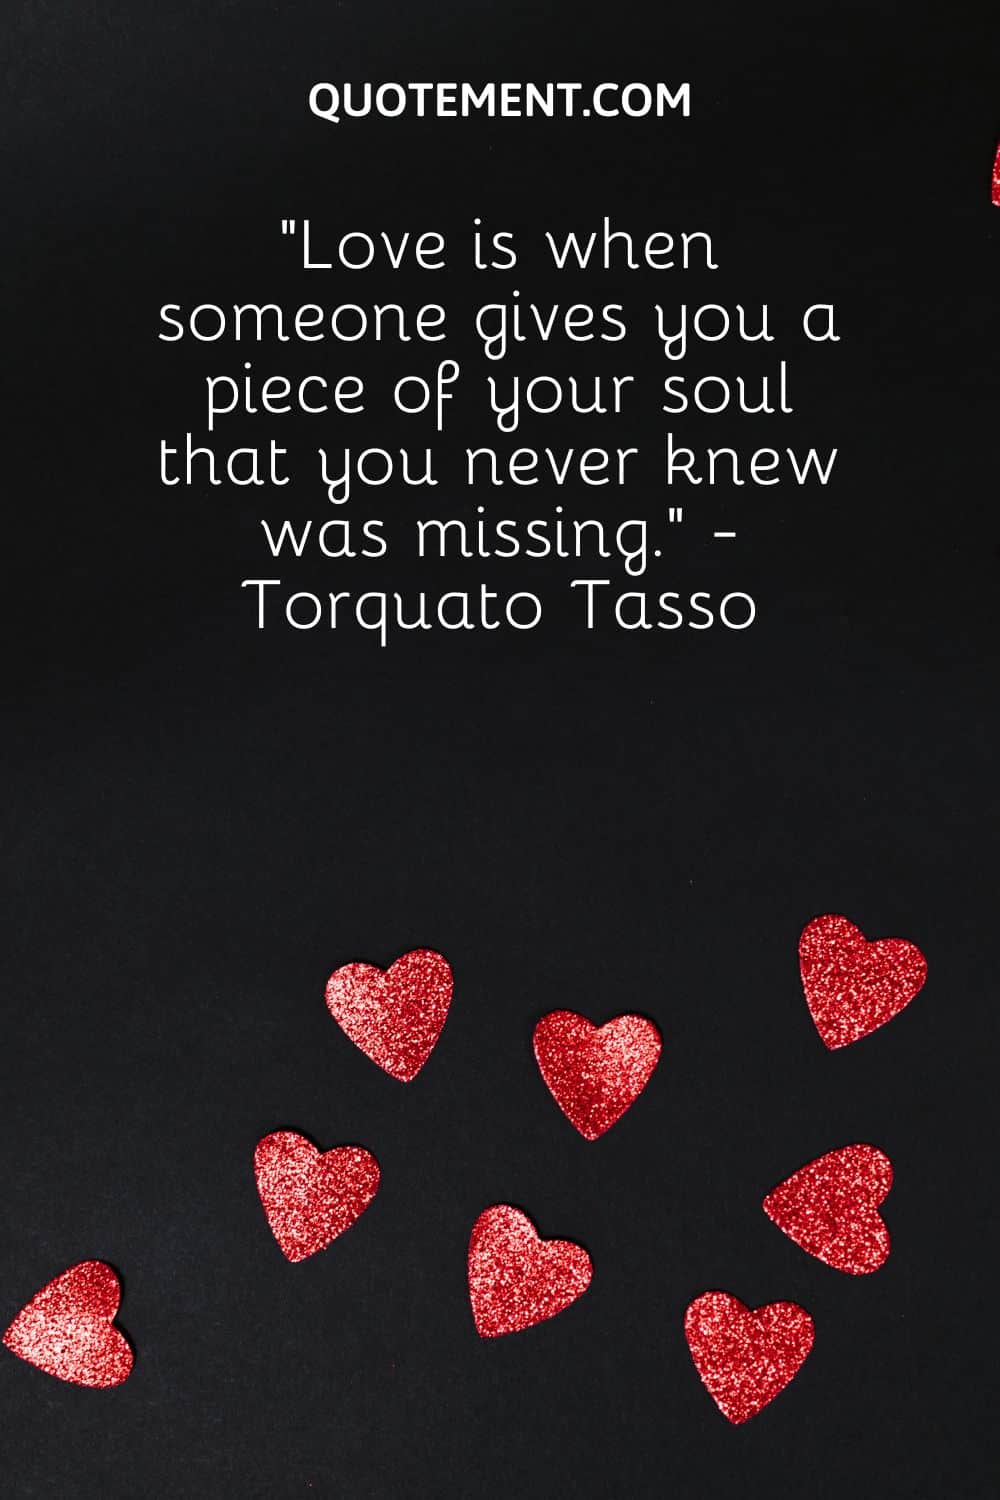 “Love is when someone gives you a piece of your soul that you never knew was missing.” - Torquato Tasso